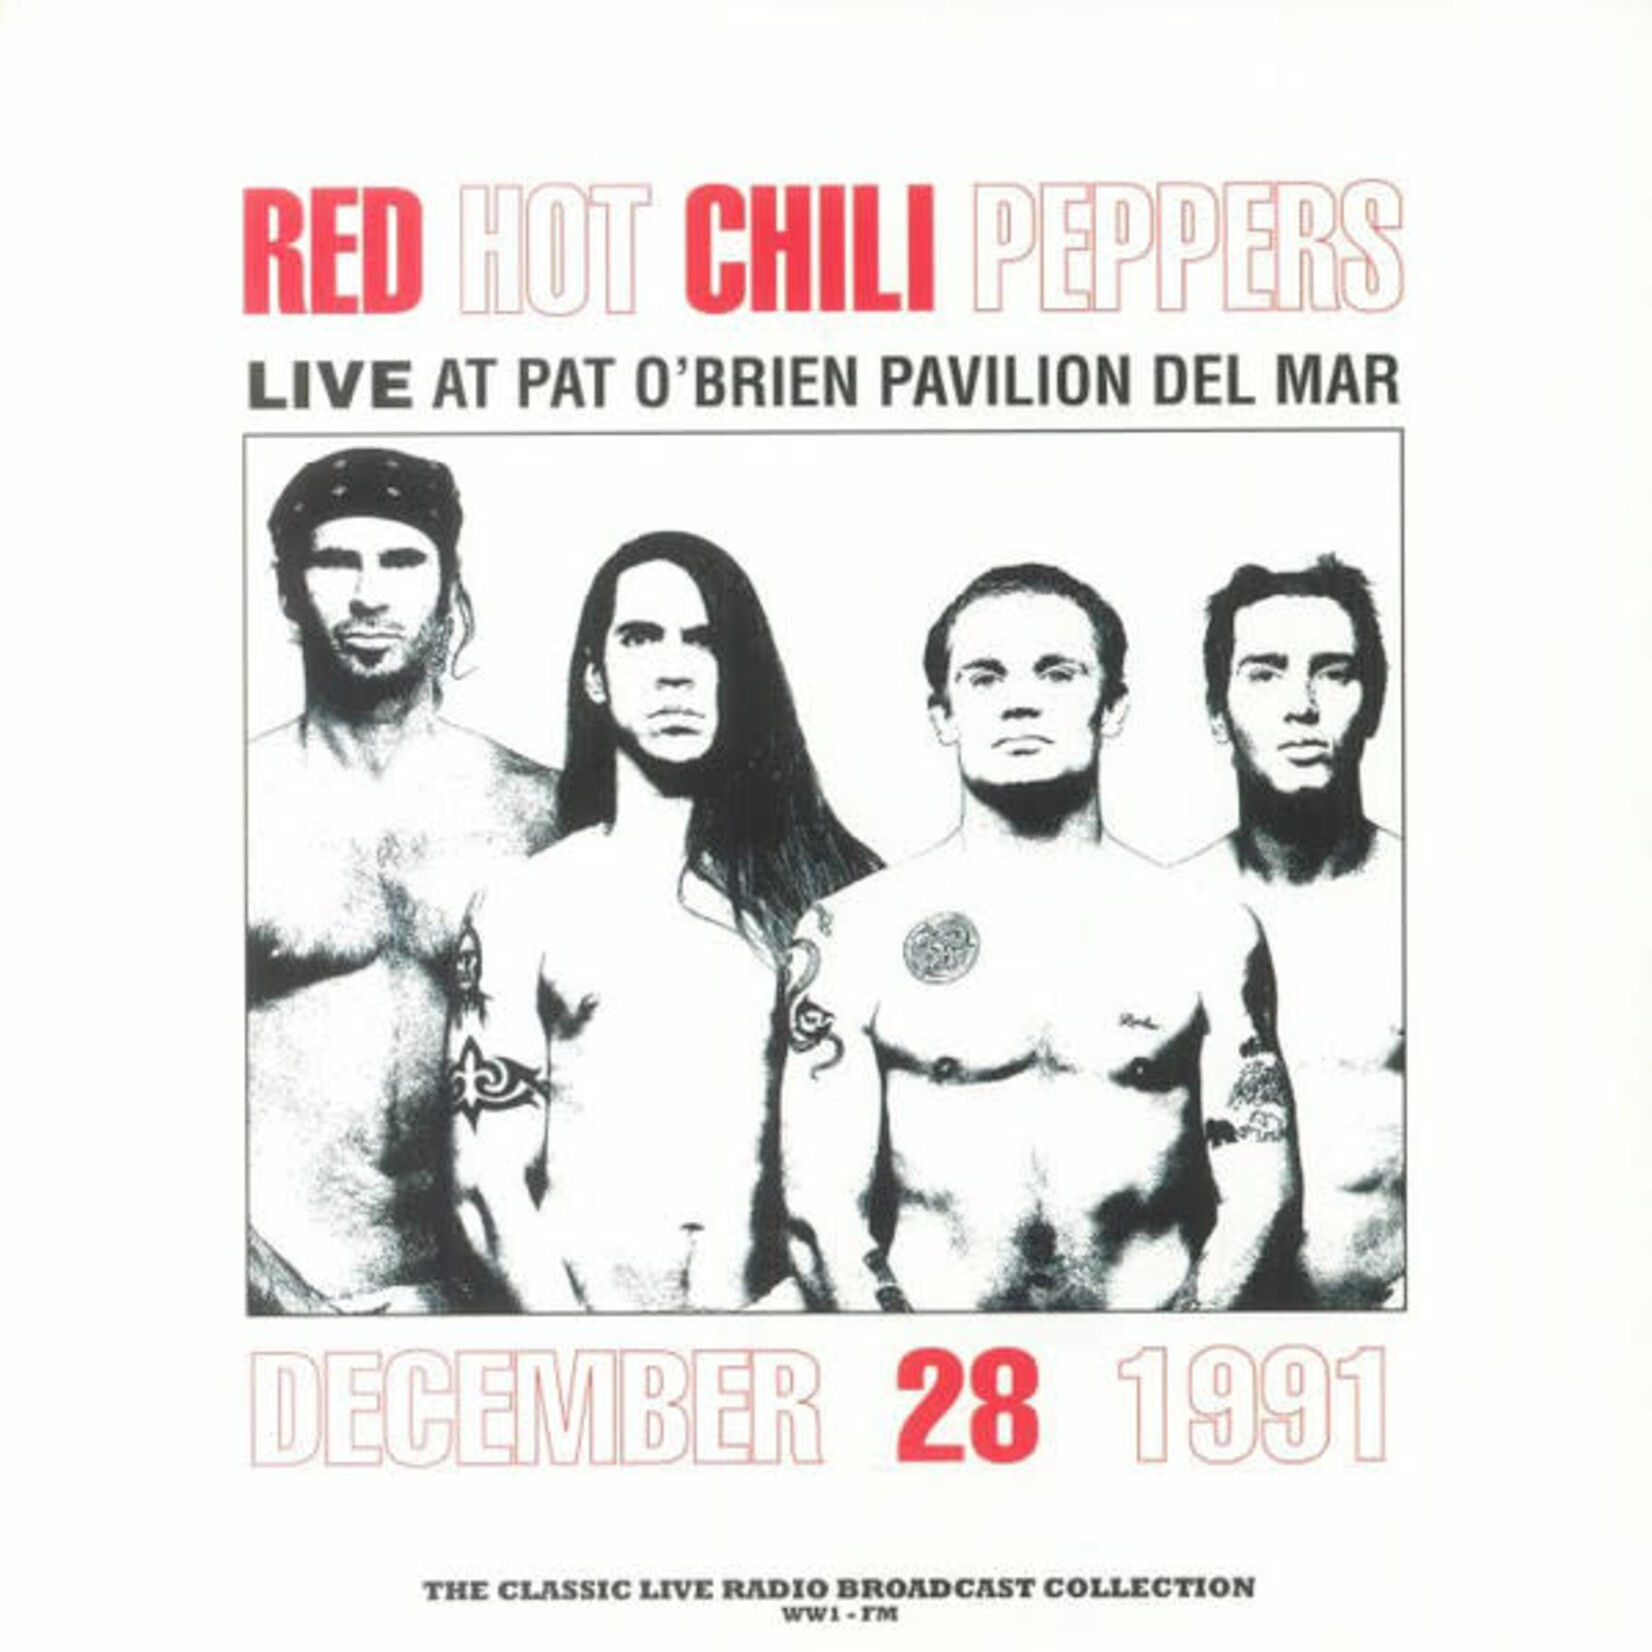 Red Hot Chili Peppers – Live At Pat O'Brien Pavilion Del Mar